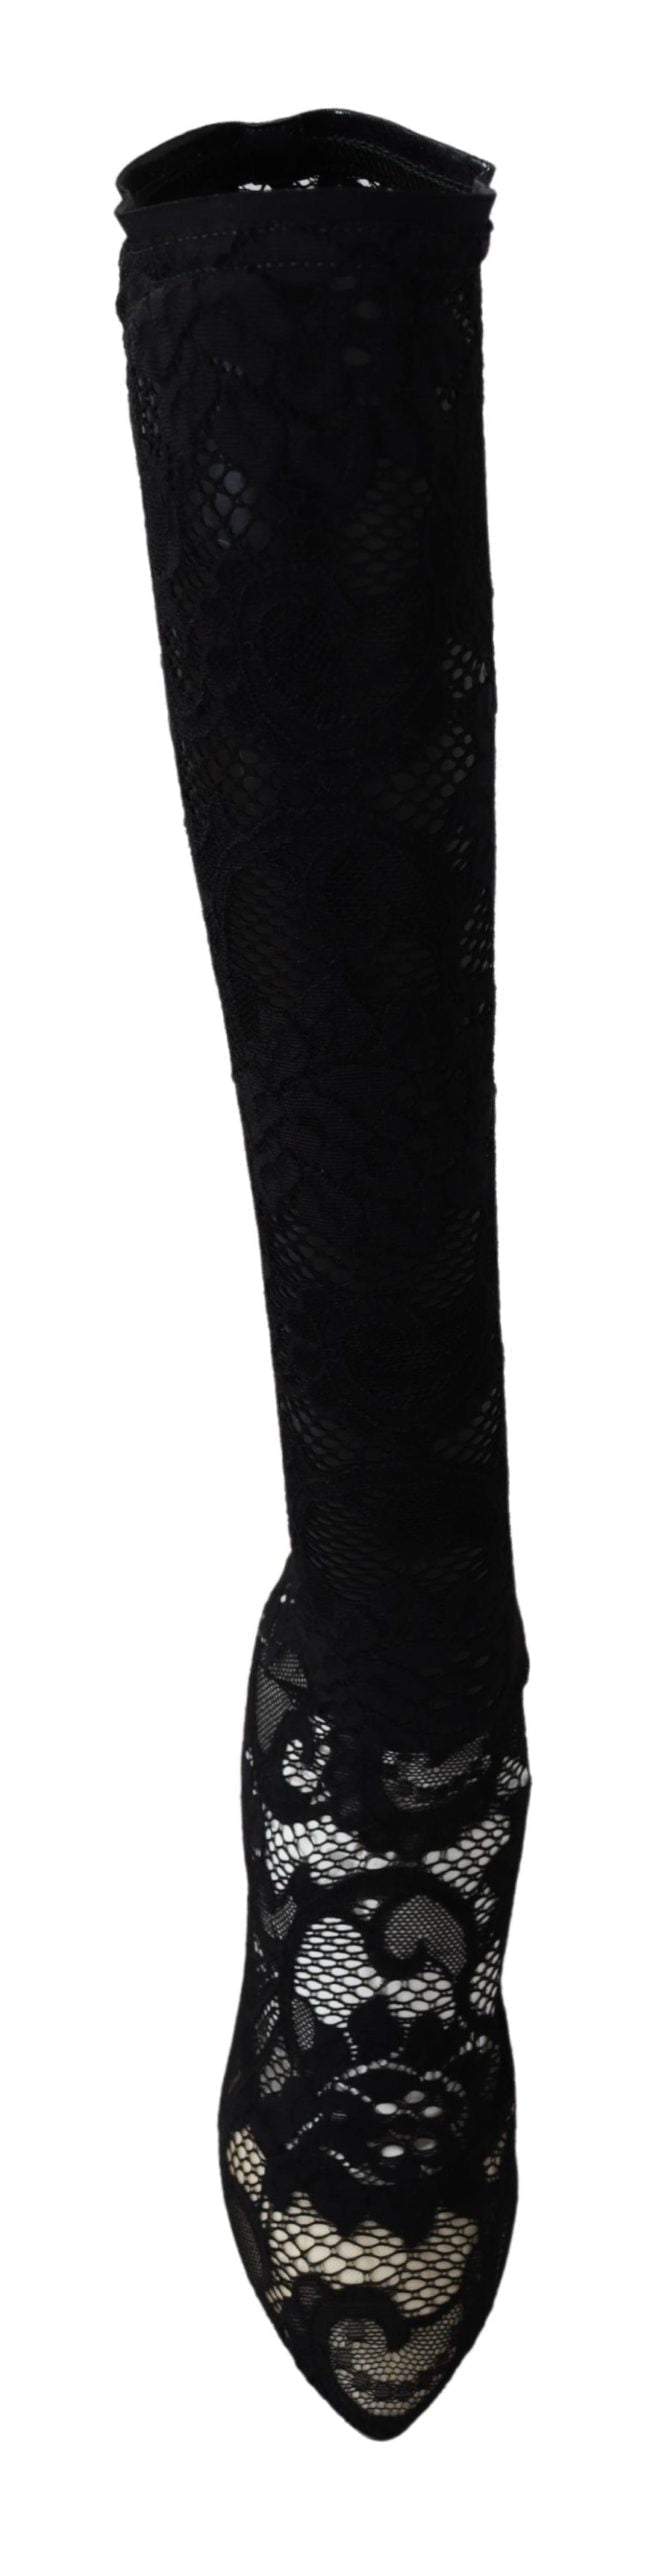 Dolce & Gabbana Black Taormina Lace Socks Boots Shoes Pumps #women, Black, Boots - Women - Shoes, Dolce & Gabbana, EU36.5/US6, EU36/US5.5, EU40.5/US10, EU41/US10.5, feed-agegroup-adult, feed-color-Black, feed-gender-female, Shoes - New Arrivals at SEYMAYKA